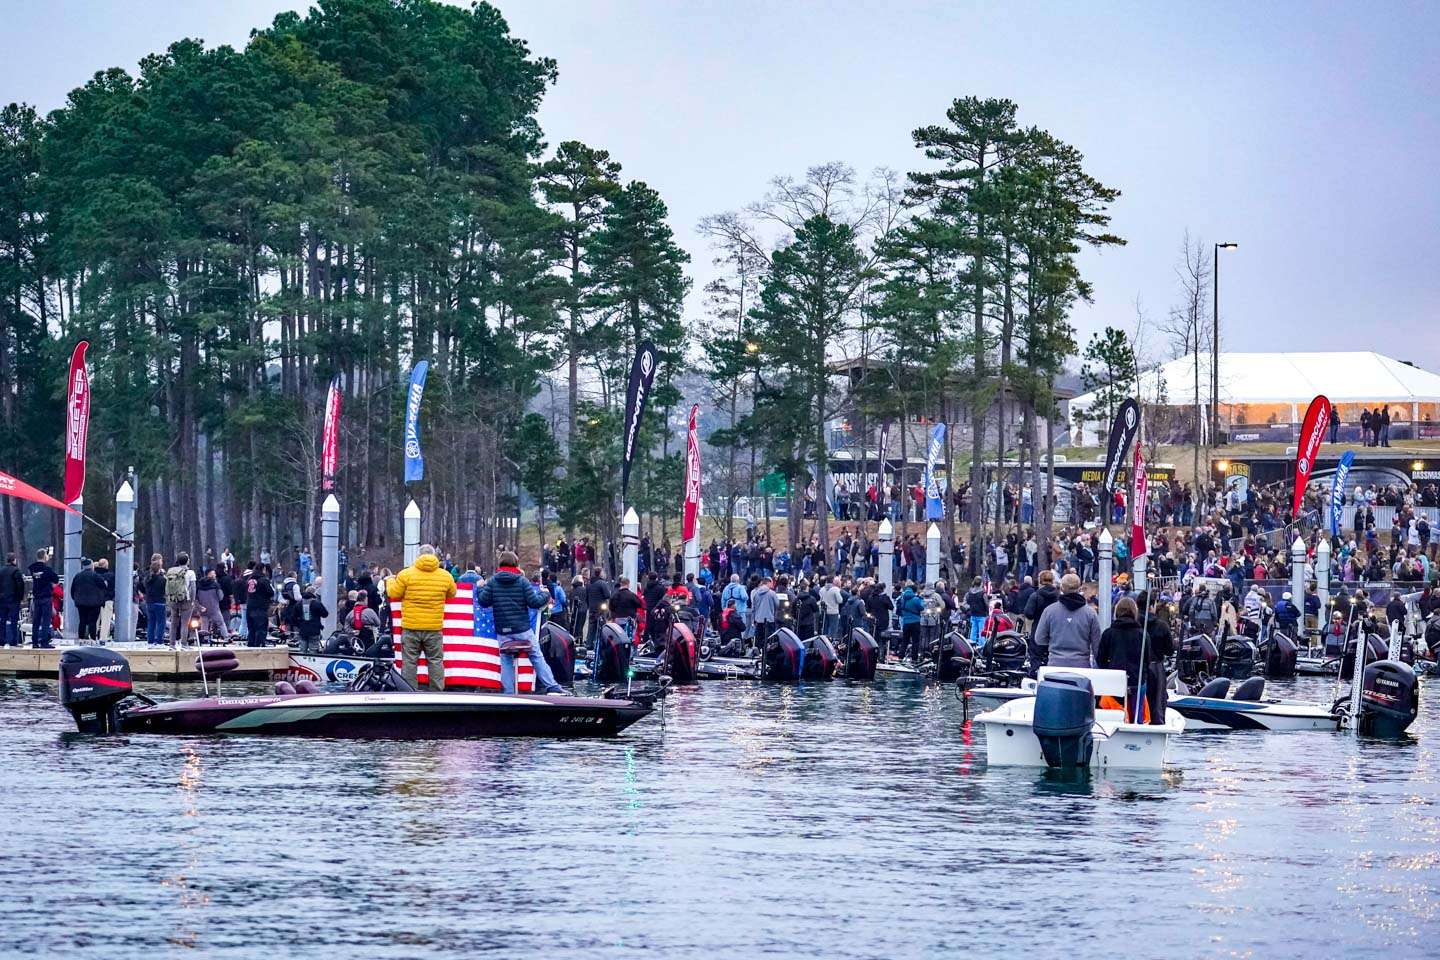 Day 2 of the Academy Sports + Outdoors Bassmaster Classic presented by Huk began just like Day 1, with an electric takeoff at Green Pond Landing on Lake Hartwell. 